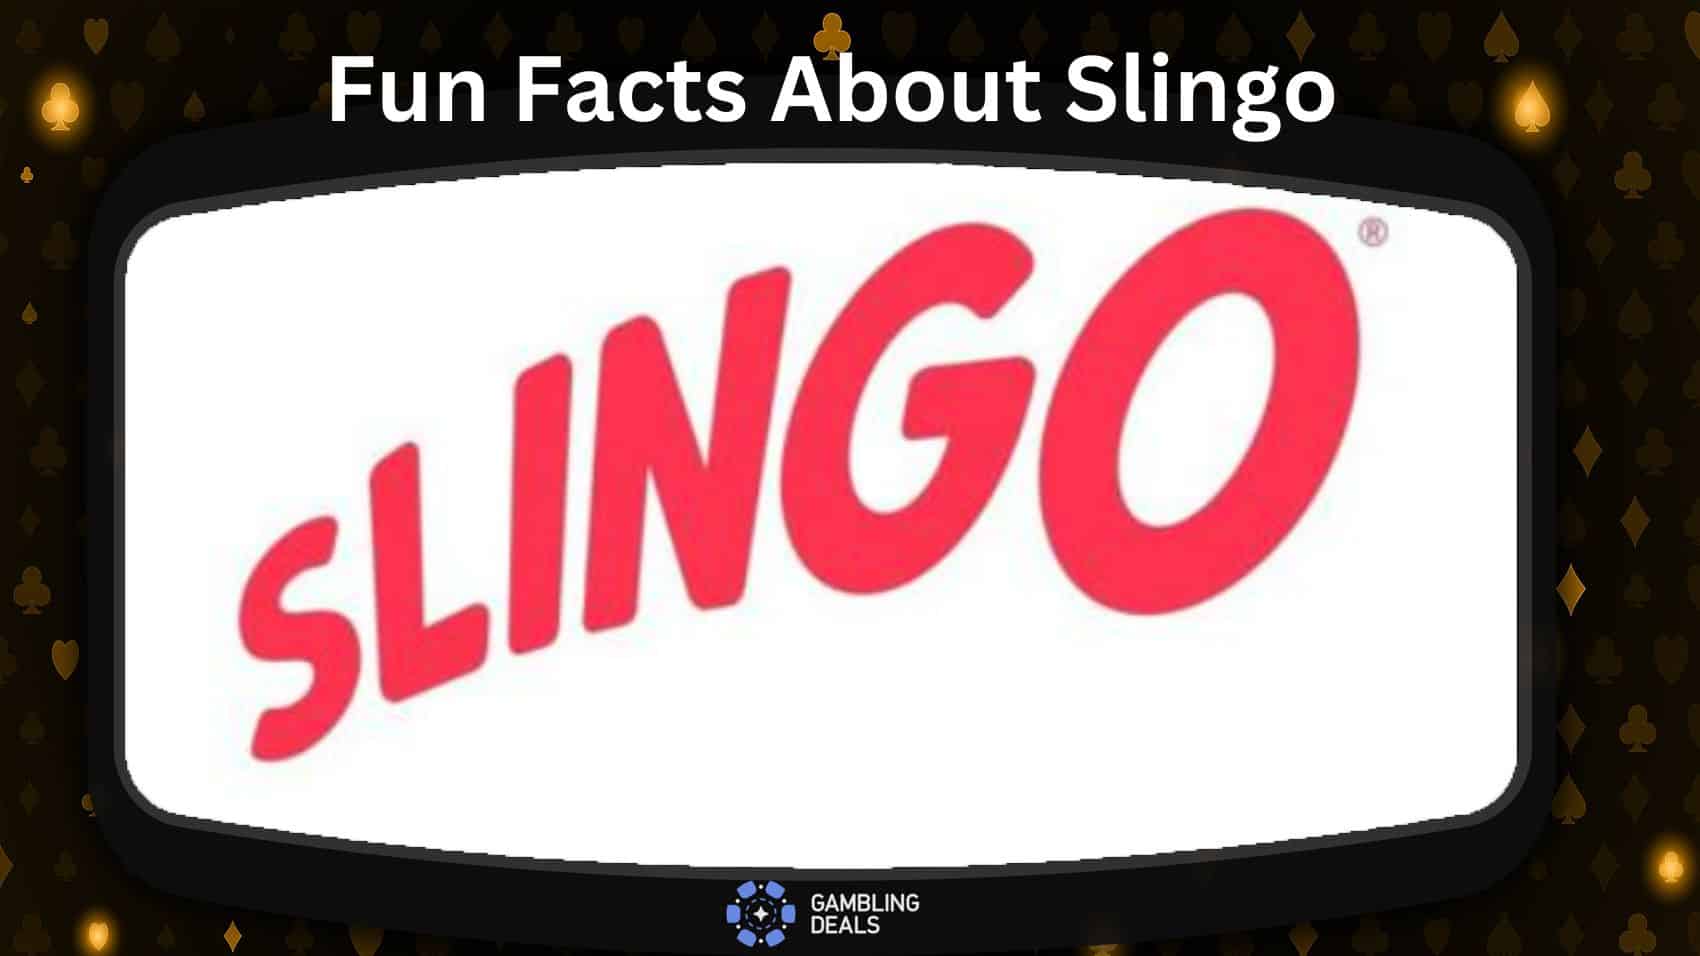 Fun Facts about Slingo